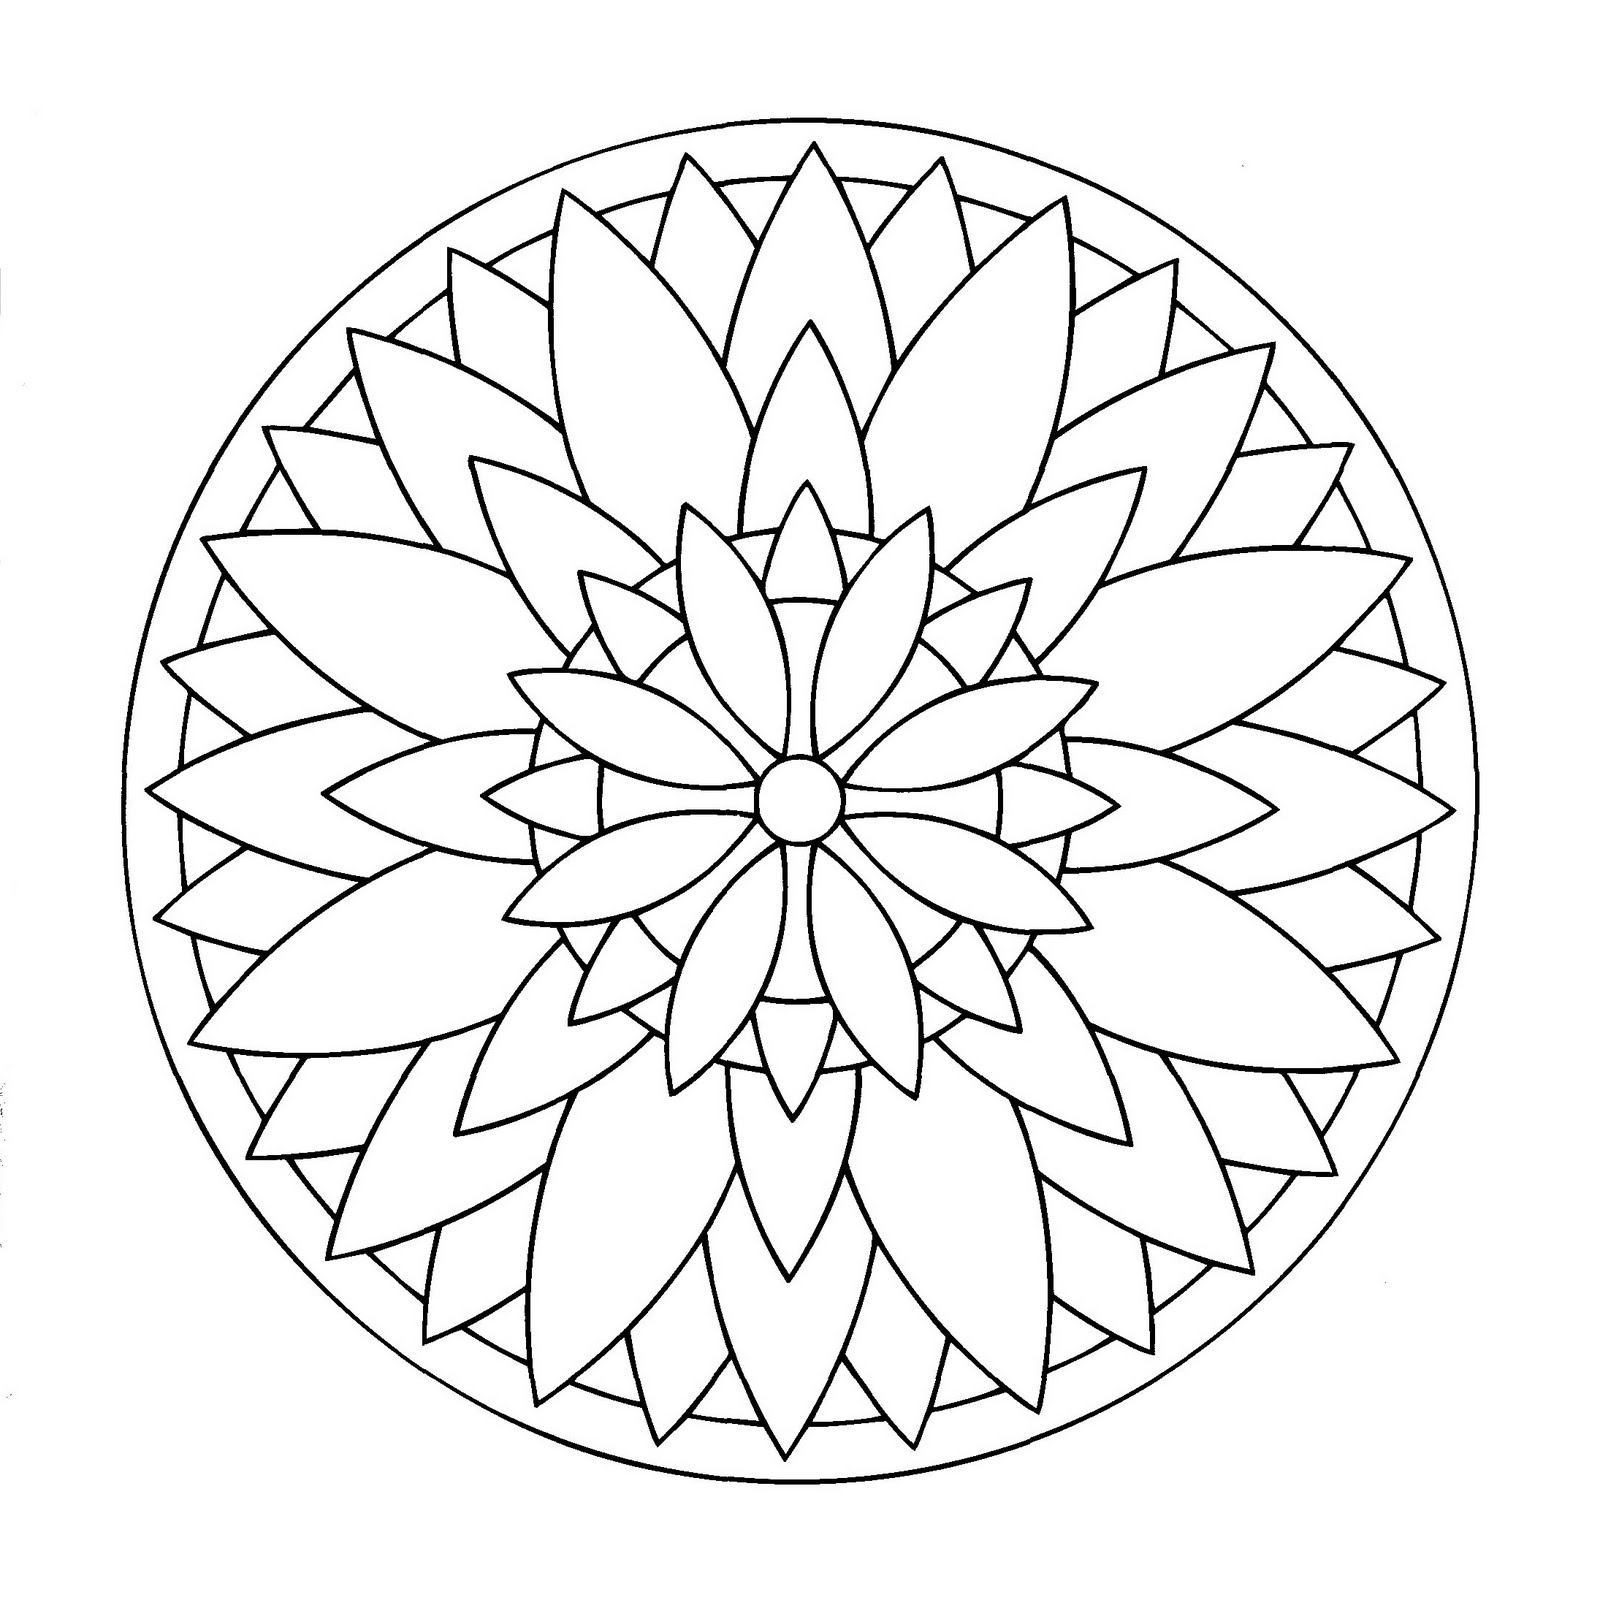 Simple Mandala drawing looking like a big Flower. The vegetal elements often marry very well with the Mandalas, discover it with this incredible Mandala. You must clear your mind and allow yourself to forget all your worries and responsibilities.